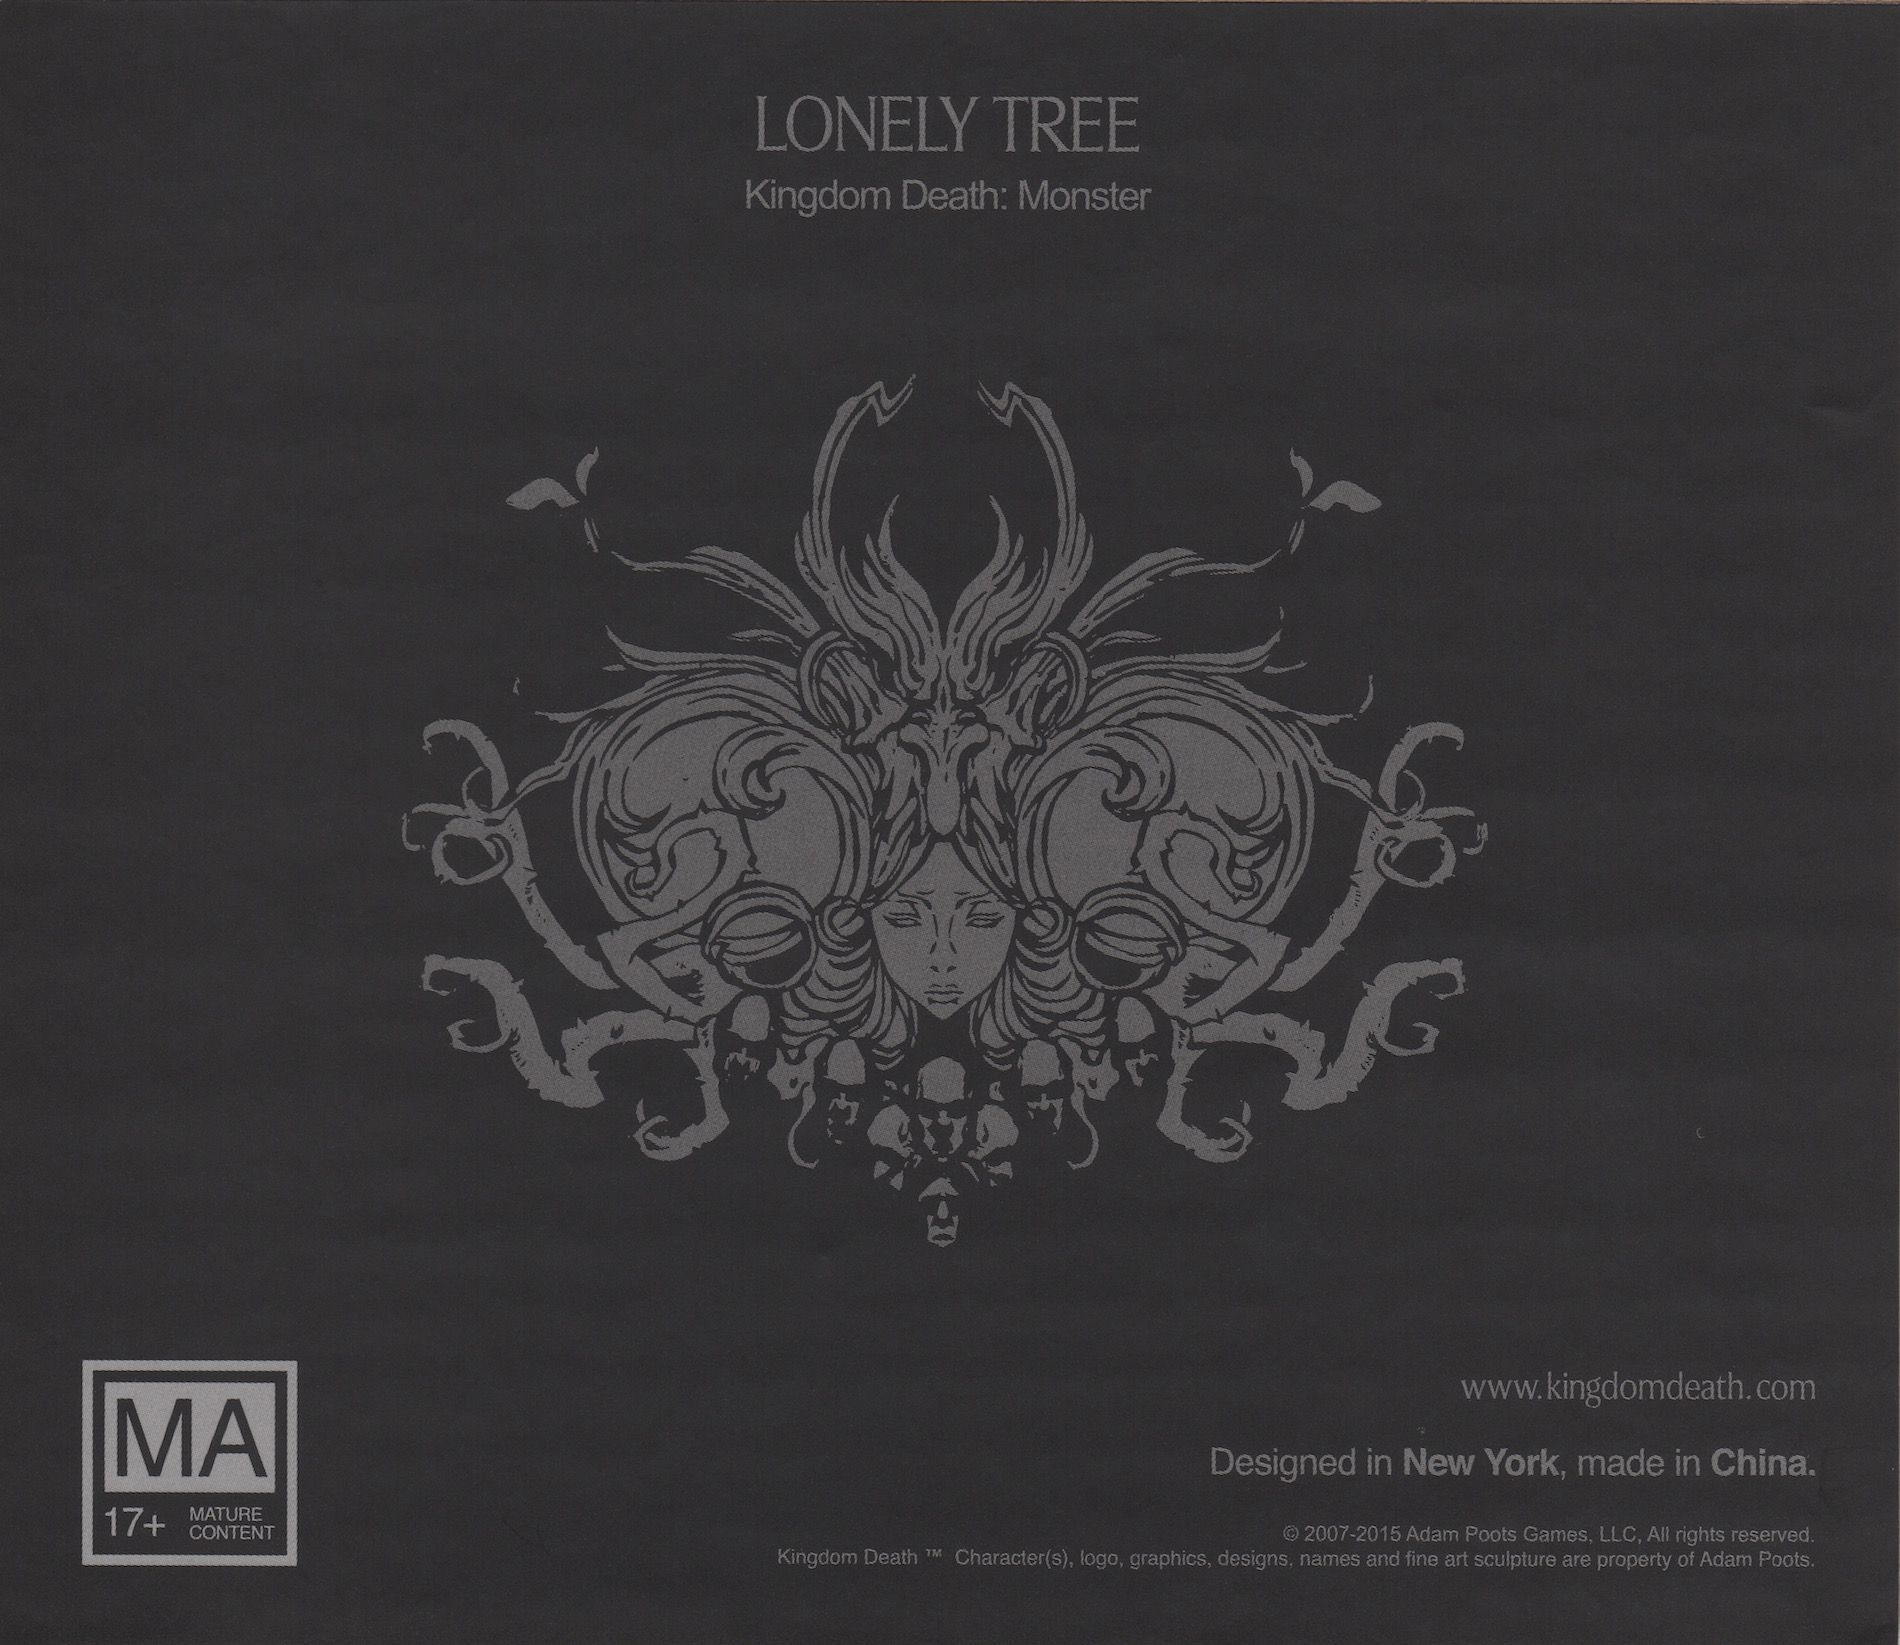 Kingdom Death: Monster – Lonely Tree Expansion